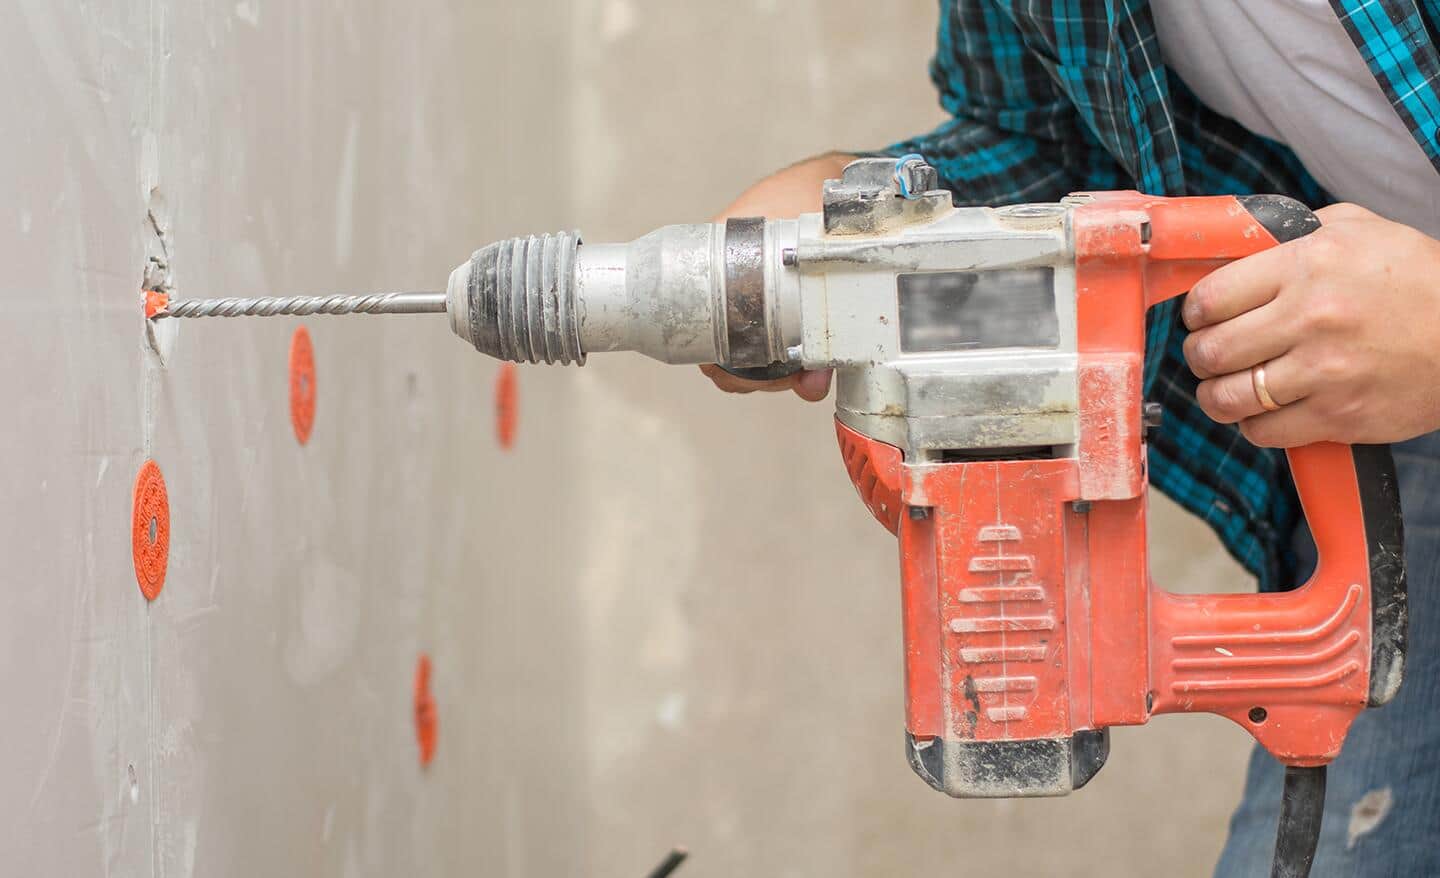 A person drilling into unfinished drywall.